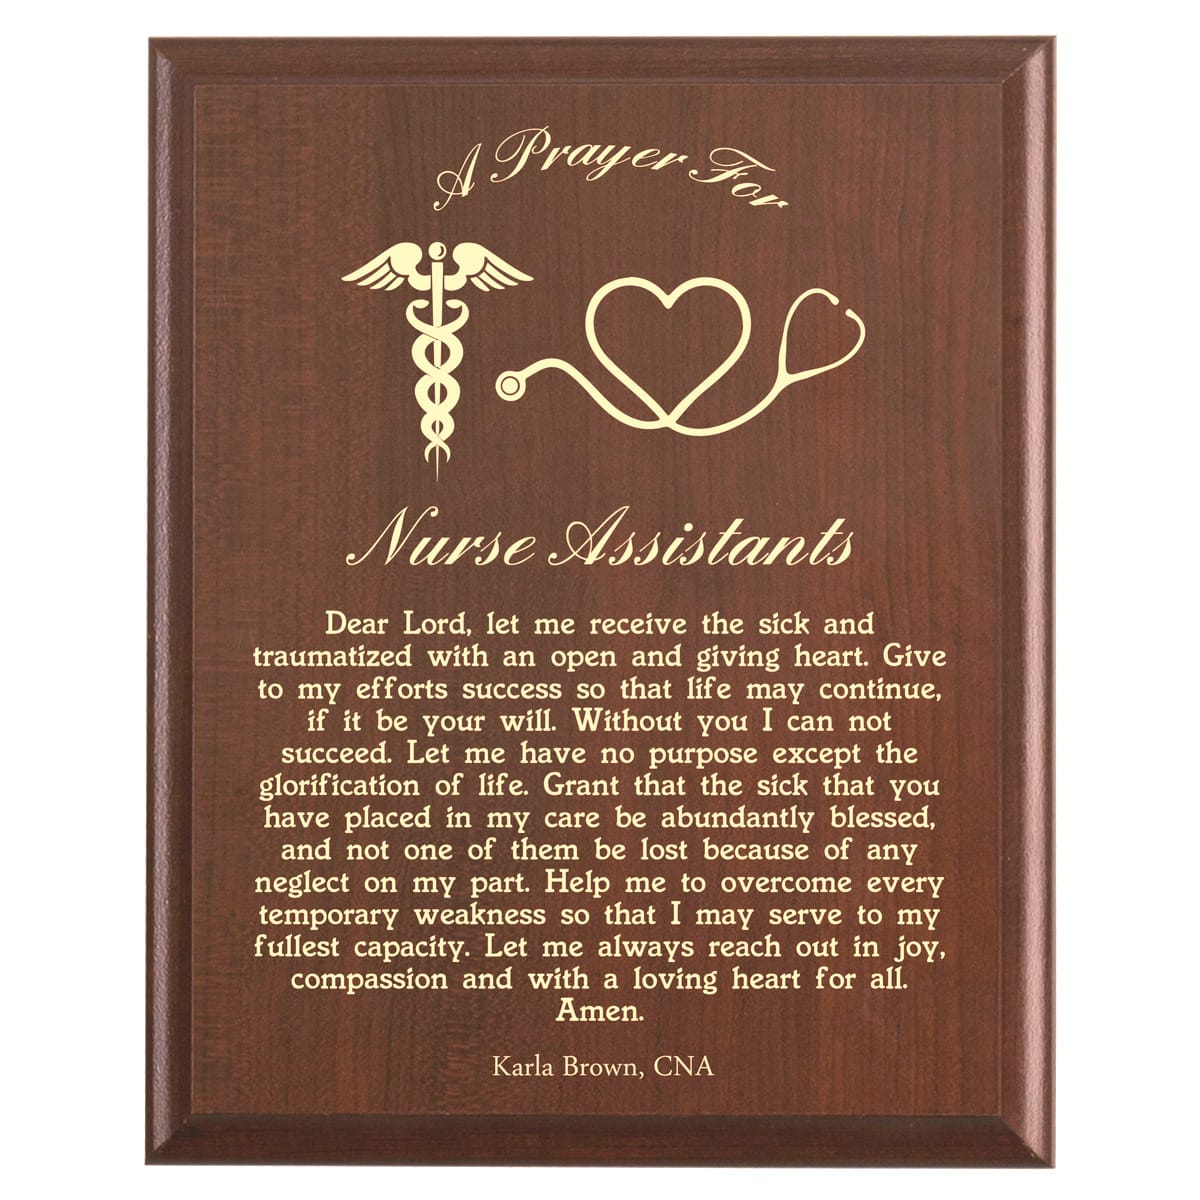 Plaque photo: Nurse Assistant Prayer Plaque design with free personalization. Wood style finish with customized text.